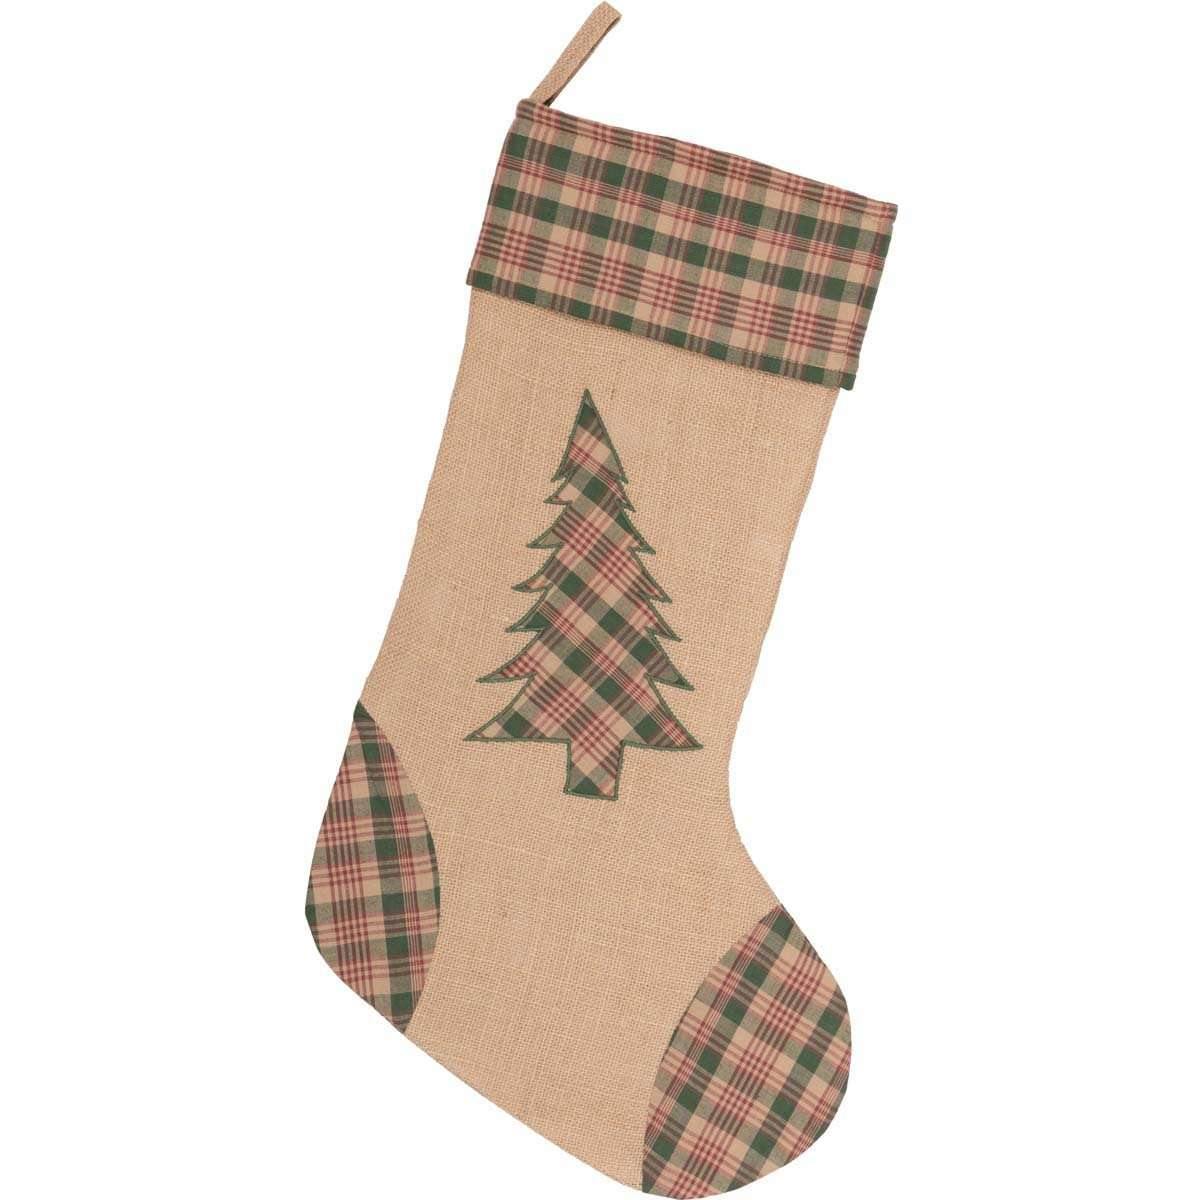 Clement Tree Stocking 12x20 VHC Brands - The Fox Decor